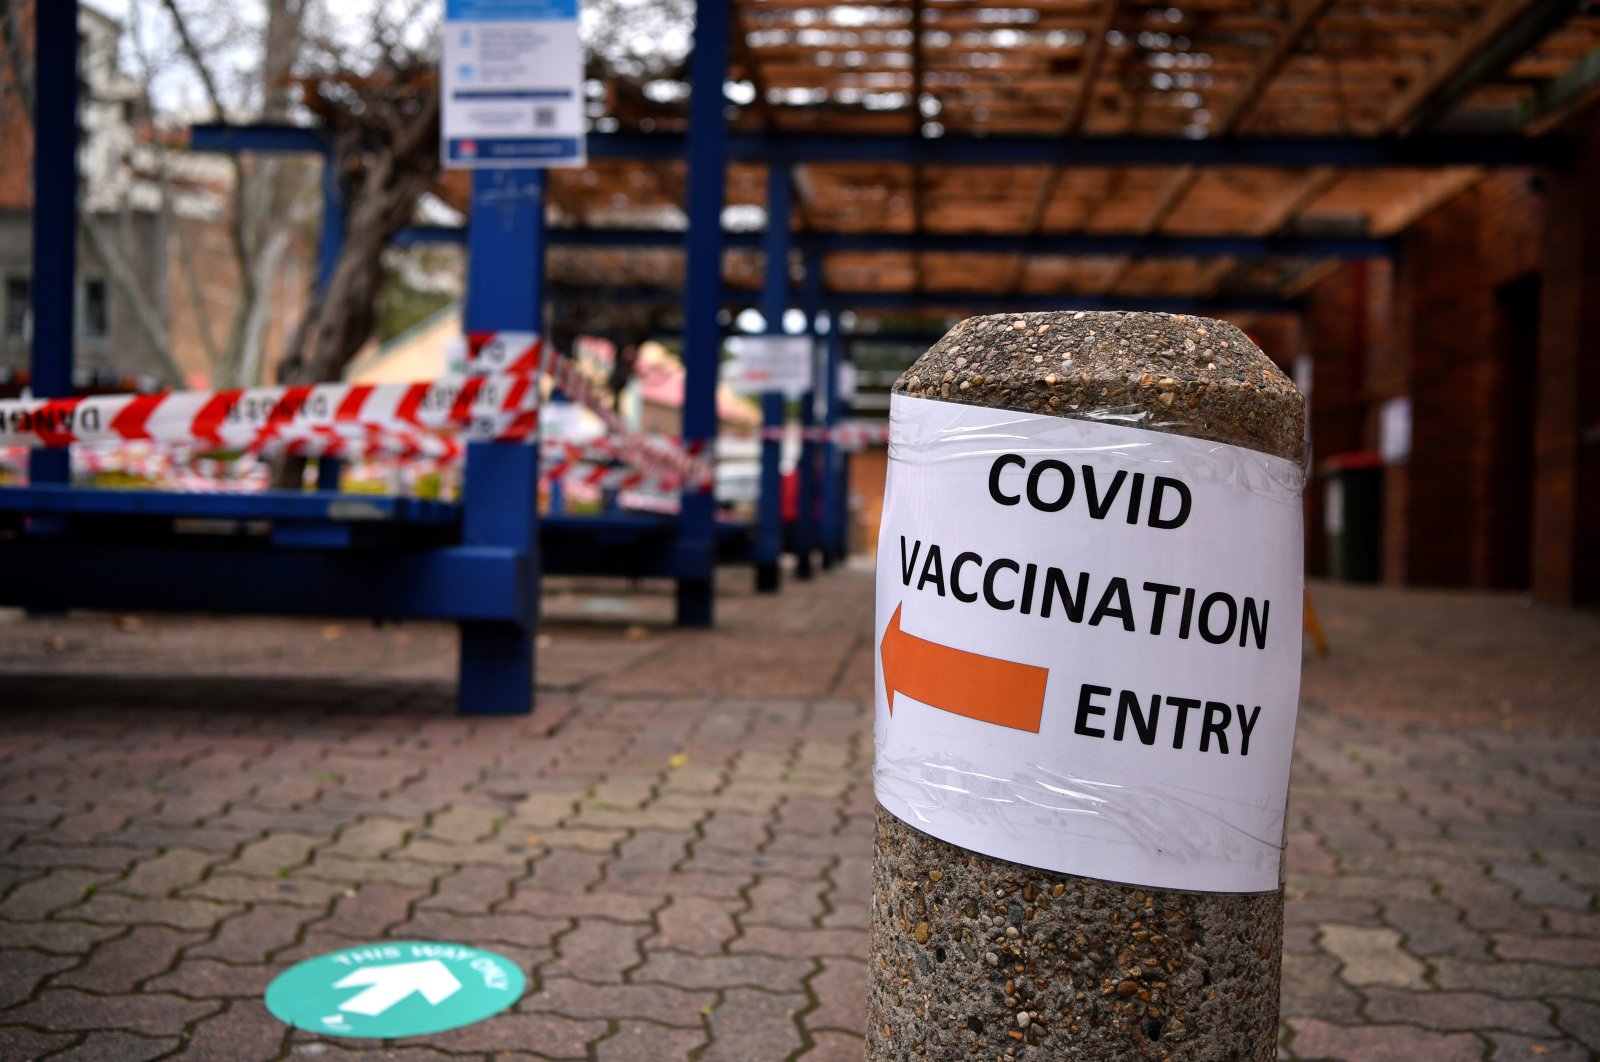 A view of signage in the AstraZeneca (Vaxzevria) COVID-19 Vaccination Clinic at Rockdale in Sydney, New South Wales, Australia, Aug. 23, 2021. (EPA Photo)